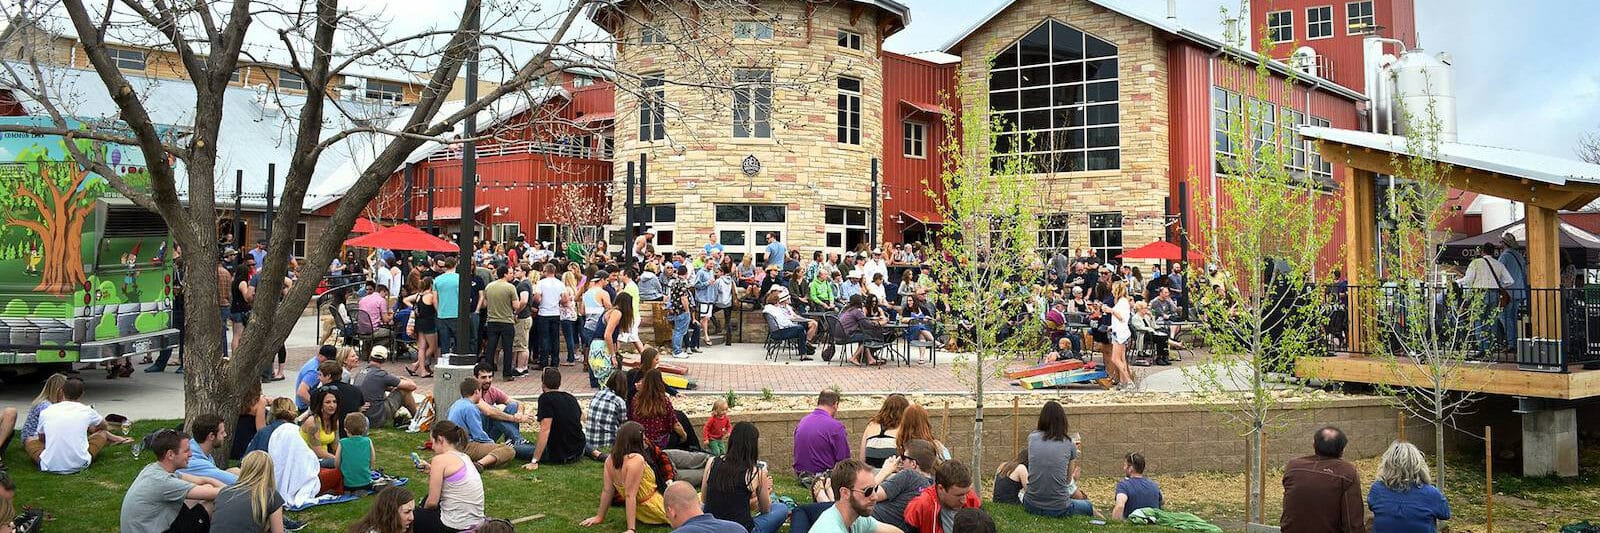 Image of the lawn and patio Odell Brewing Co in Fort Collins, Colorado